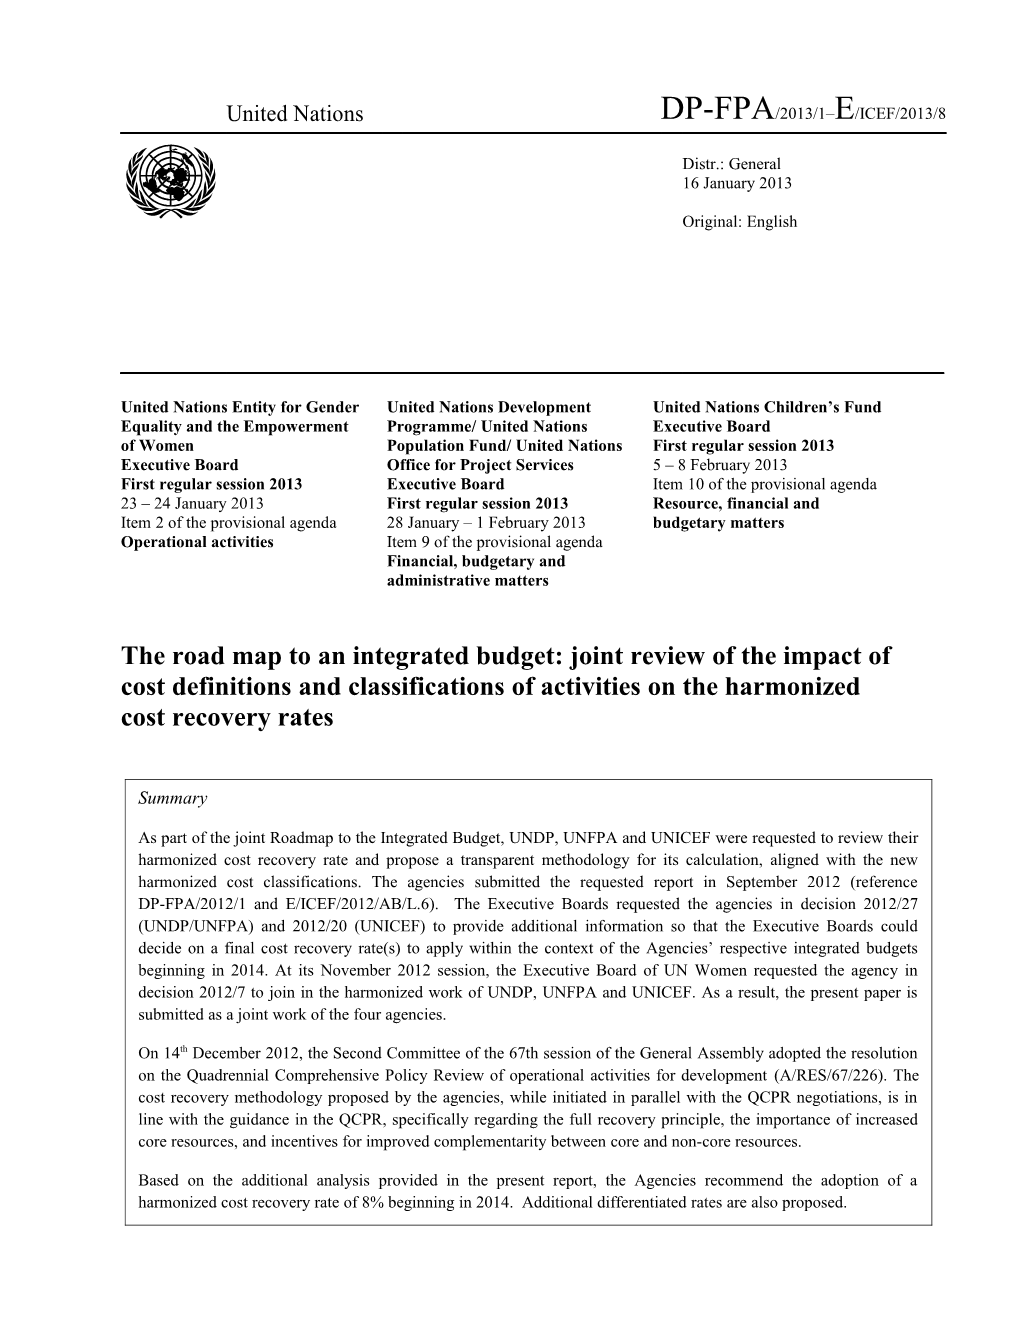 The Road Map to an Integrated Budget: Joint Review of the Impact of Cost Definitions And